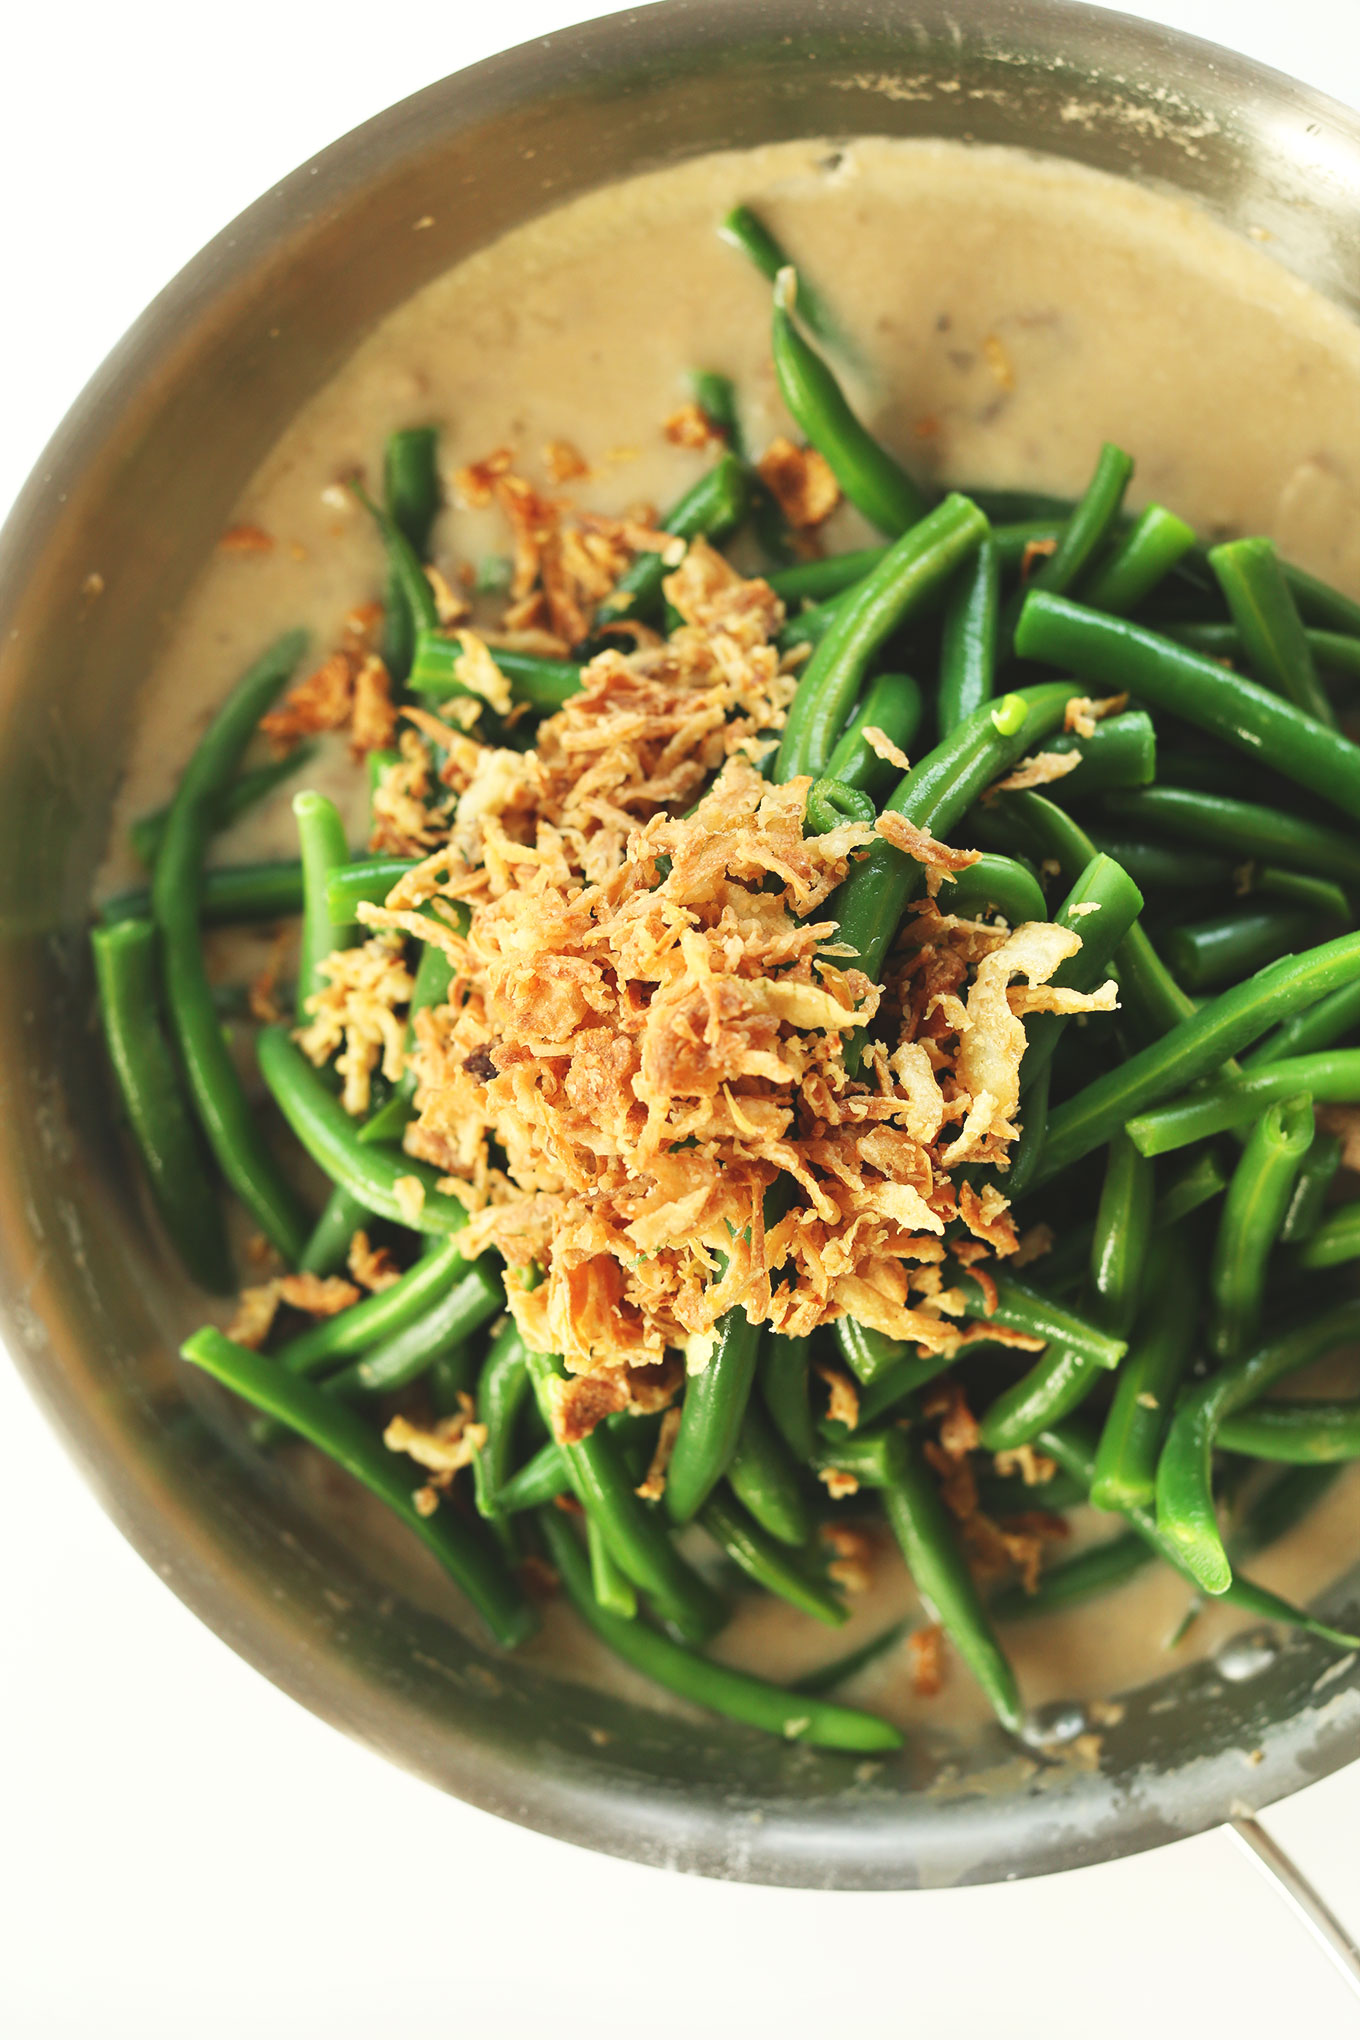 Pan filled with our vegan Green Bean Casserole recipe